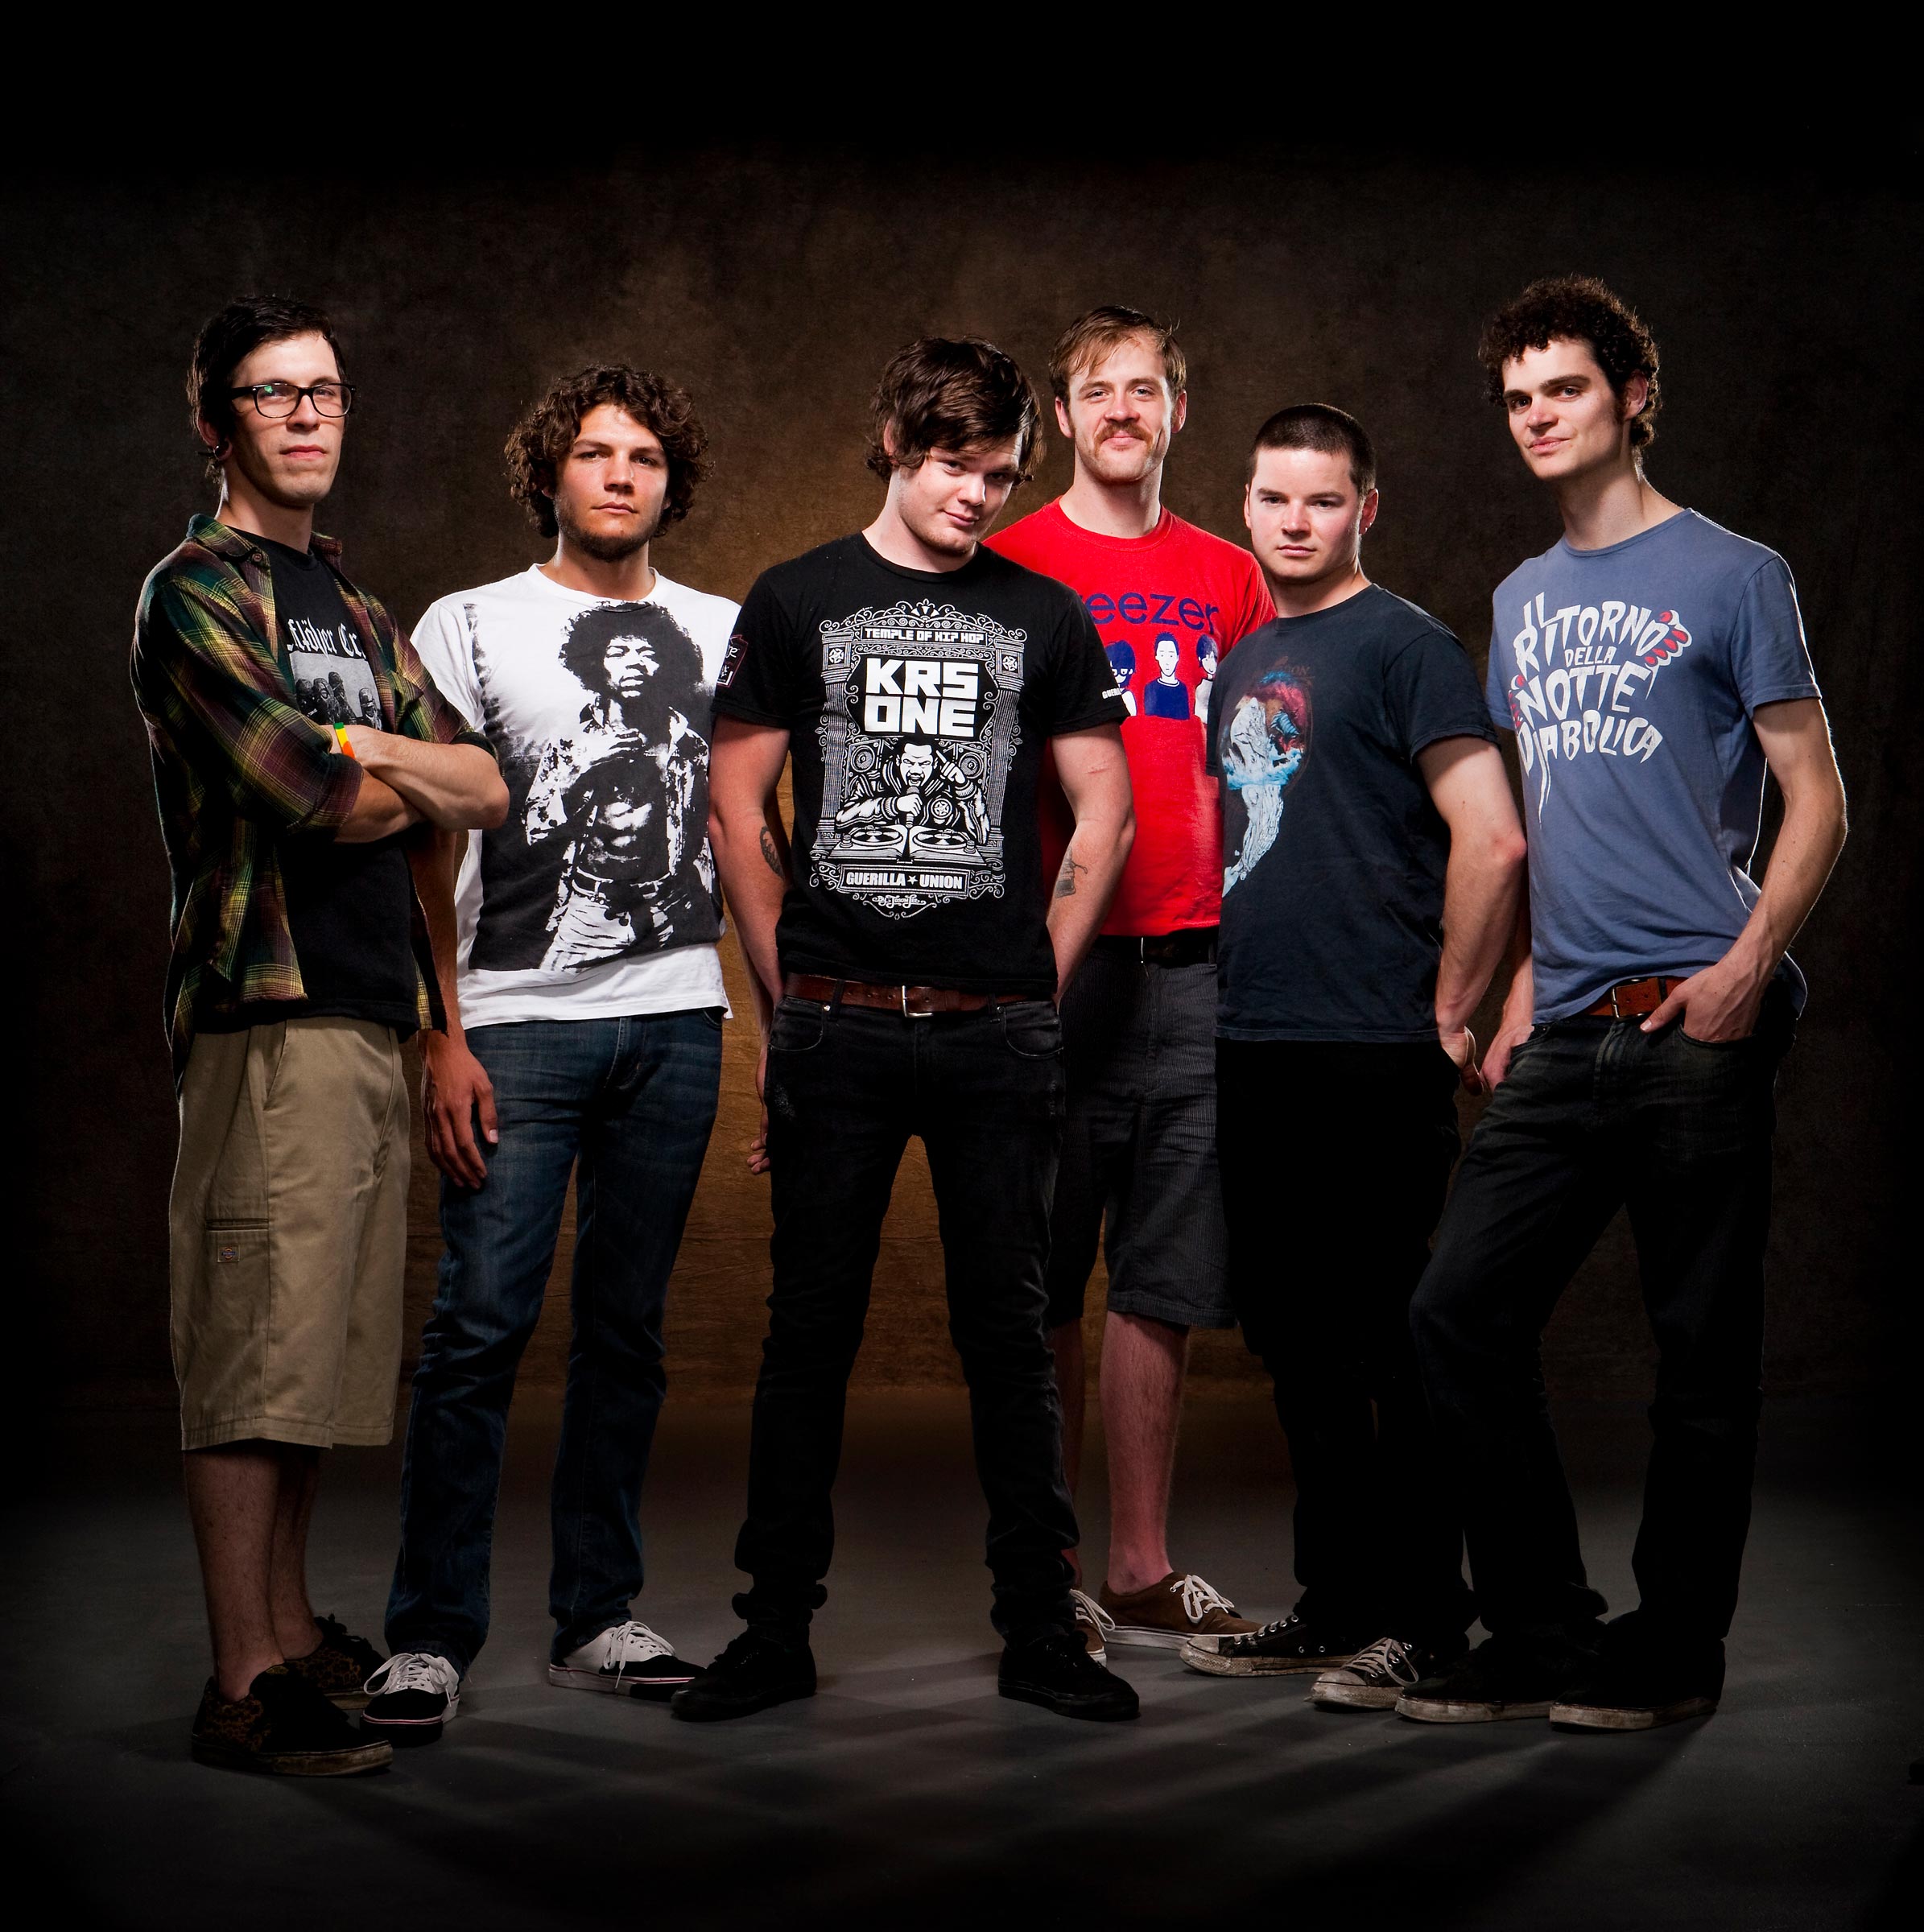 Musician band photography of 6 men